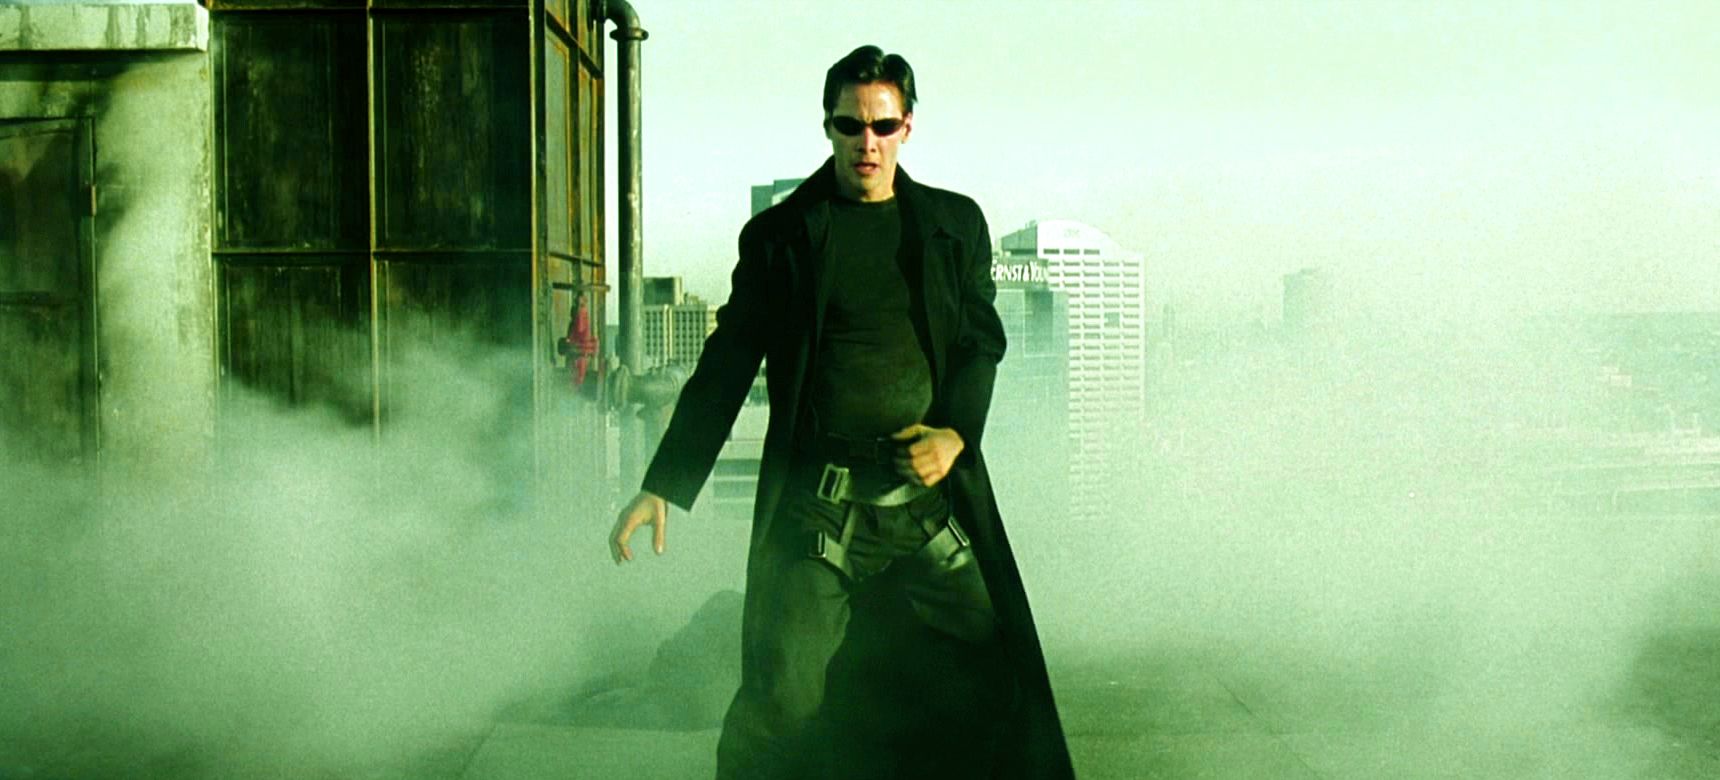 Neo surrounded by green smoke